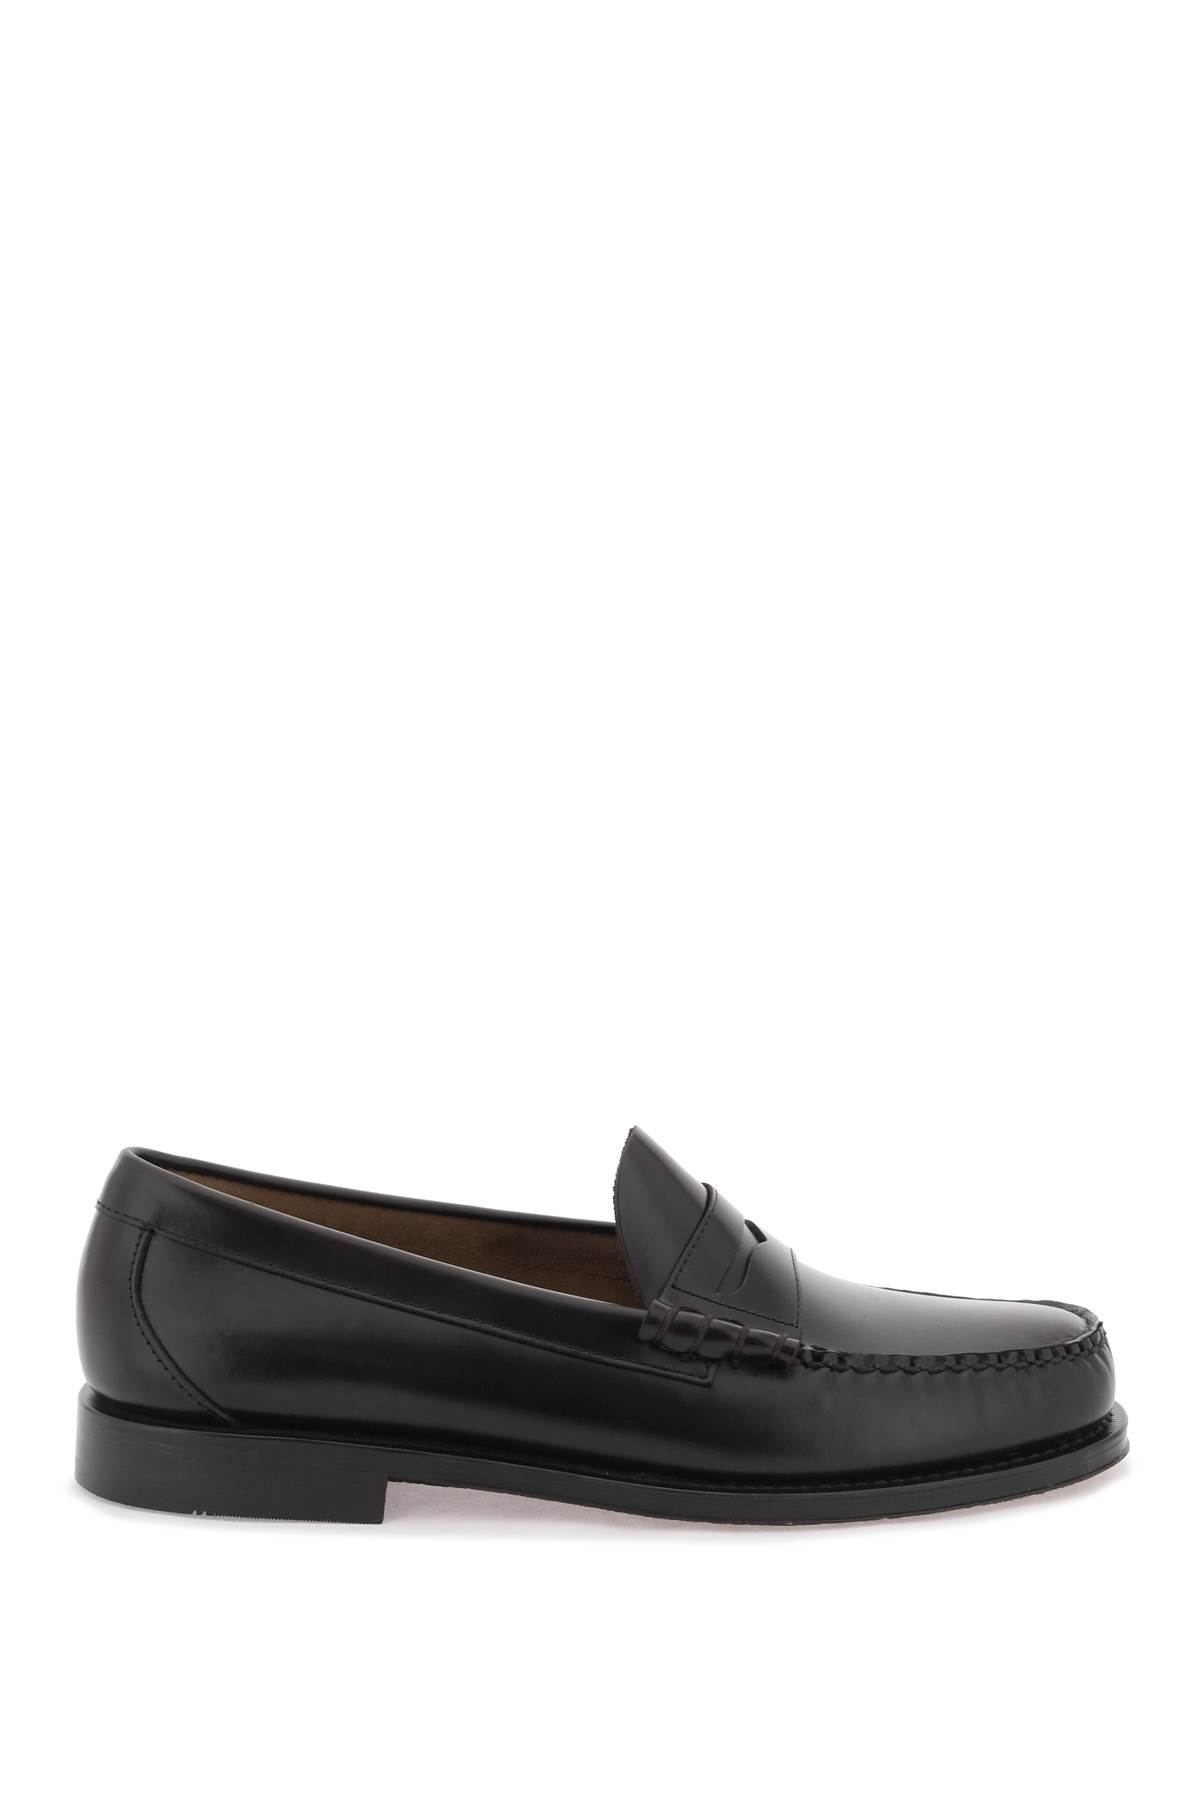 G.H.Bass & Co. Weejuns Larson Penny Loafers